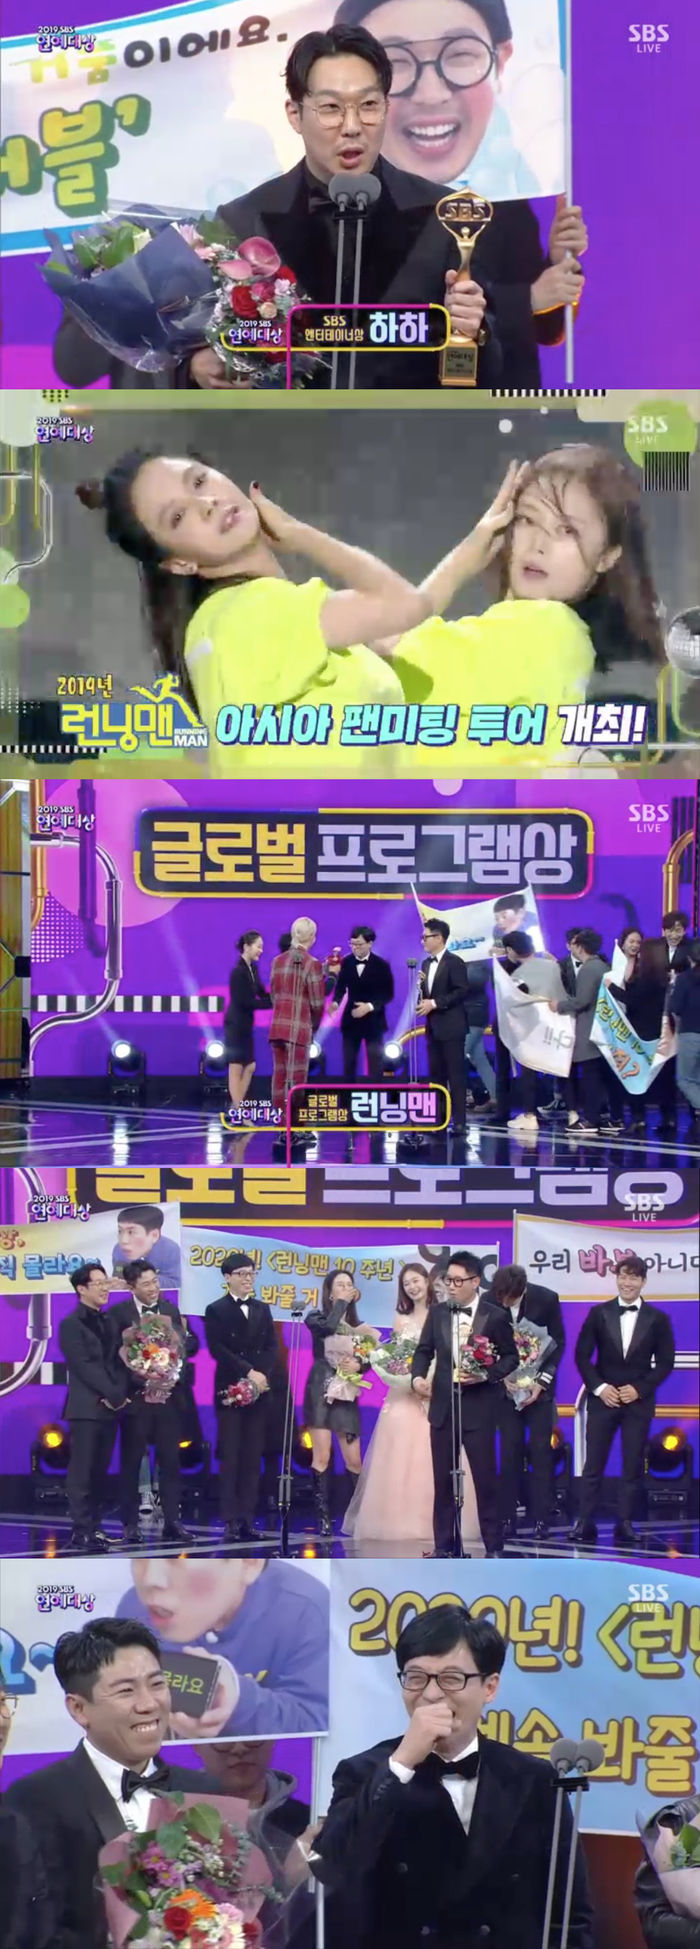 It was the Running Man that caught the hearts of global fans.The 2019 SBS Entertainment Grand Prize, which was broadcast live from 9 pm at SBS Prism Tower in Sangam-dong, Mapo-gu, Seoul, opened a spectacular show with Kim Sung-joo, Park Na-rae and Cho Jung-sik.The honor of the SBS Global Program went to Running Man.Running Man has been a global program for the past nine years, receiving a lot of love from fans around the world, and SBS has praised it.On behalf of the Running Man, Ji Suk-jin said, In fact, I thought that someday all the Running Man would get the grand prize, but I do not think it is today.There are so many people who are so grateful, he said, referring to the names of the staff. I am so grateful that all the Running Man are showing such a great sum.And I think this is a prize given by viewers, and I think it was awarded thanks to fans overseas. Happy New Year.I will play hard in 2020, he said.Also, the members chemistry exploded as Ji Suk-jin spoke of his award testimony, and Yoo Jae-Suk and Kim Jong-guk laughed at Ji Suk-jins award testimony behind him.So Ji Suk-jin said, Why do you want to control me? Ji-seok said, No, I will finish this because I do not have time.And the entertainer prize given to the indispensable being in the entertainment on this day went to Haha.Haha took to the stage with an unexpected look at the Prime Minister, who said: So grateful, I didnt really expect it, I was just going to attend today.In fact, last year, I was resting all the time, so I was not sorry. Thank you for comforting me with the entertainer.Our members are going to be in their 10th year. I will say thank you so much to many people, and I will honor the guests and viewers who have been together, Haha said. I love my wife and three children at home.I will live well, I will work hard, he said.